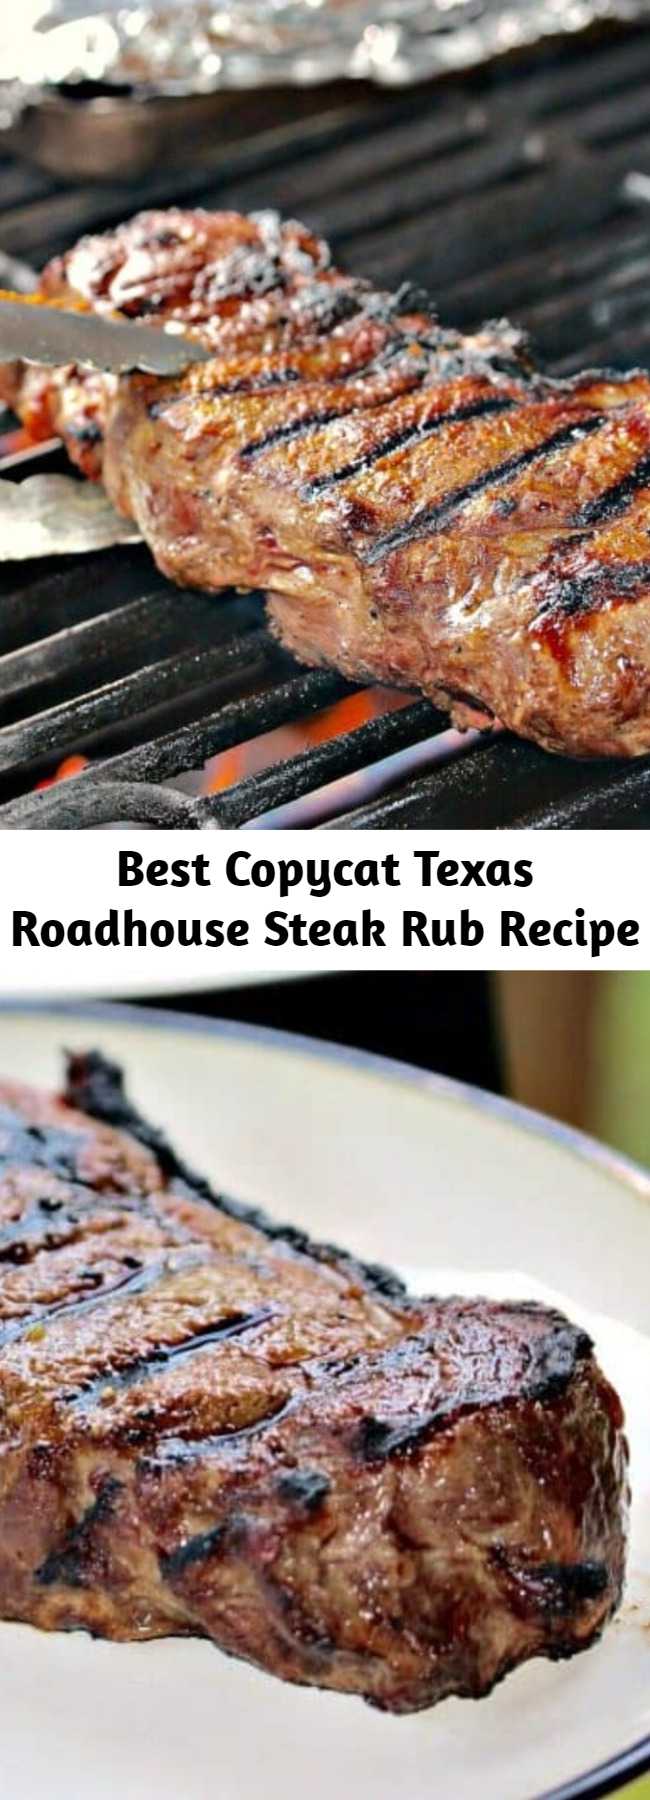 Best Copycat Texas Roadhouse Steak Rub Recipe - Just a few simple seasonings is all you need to make the best dry steak rub recipe to compliment the amazing flavors in your chicken or steak, and tastes just like the Texas Roadhouse restaurant!